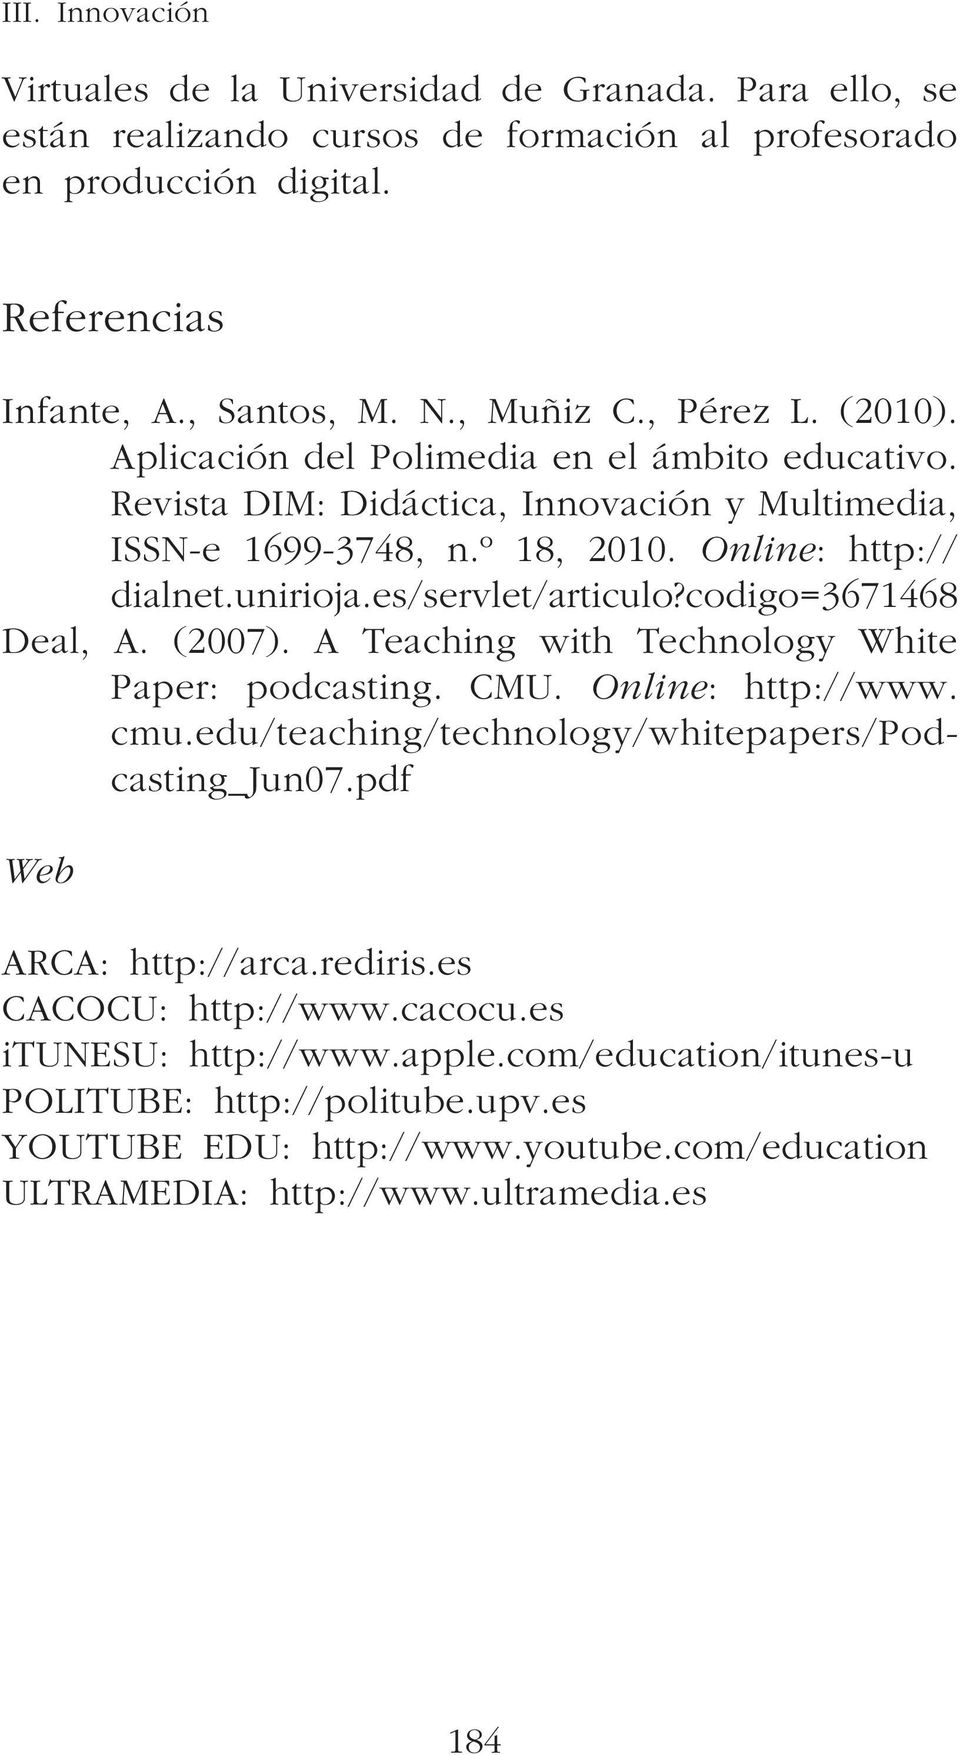 es/servlet/articulo?codigo=3671468 Deal, A. (2007). A Teaching with Technology White Paper: podcasting. CMU. Online: http://www. cmu.edu/teaching/technology/whitepapers/podcasting_jun07.